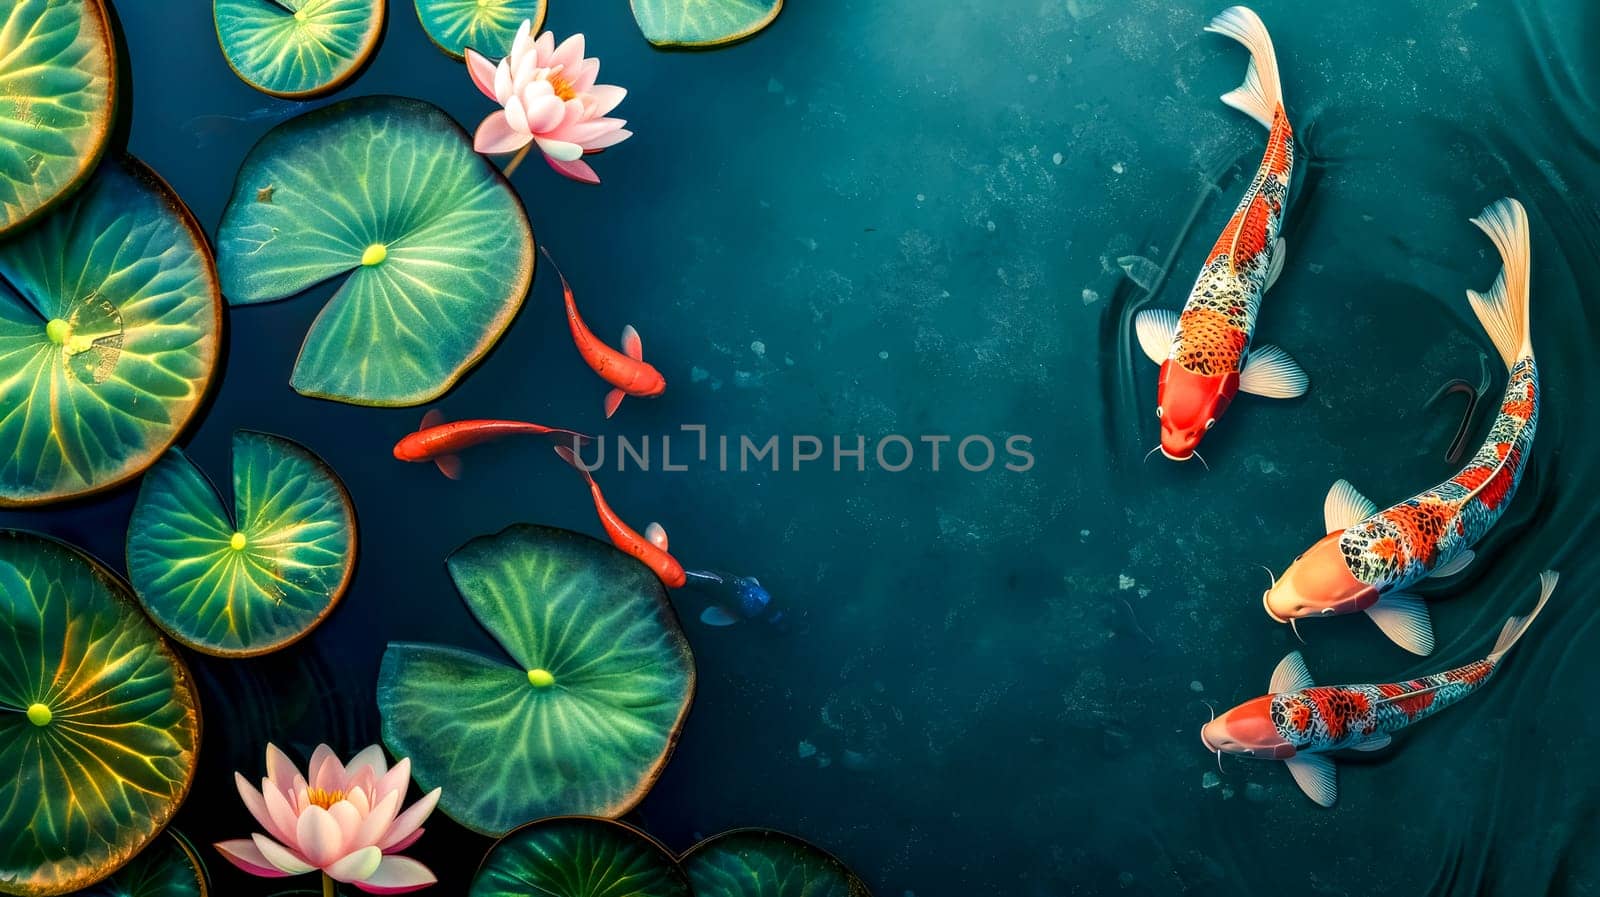 Serene koi pond with blooming lotuses by Edophoto